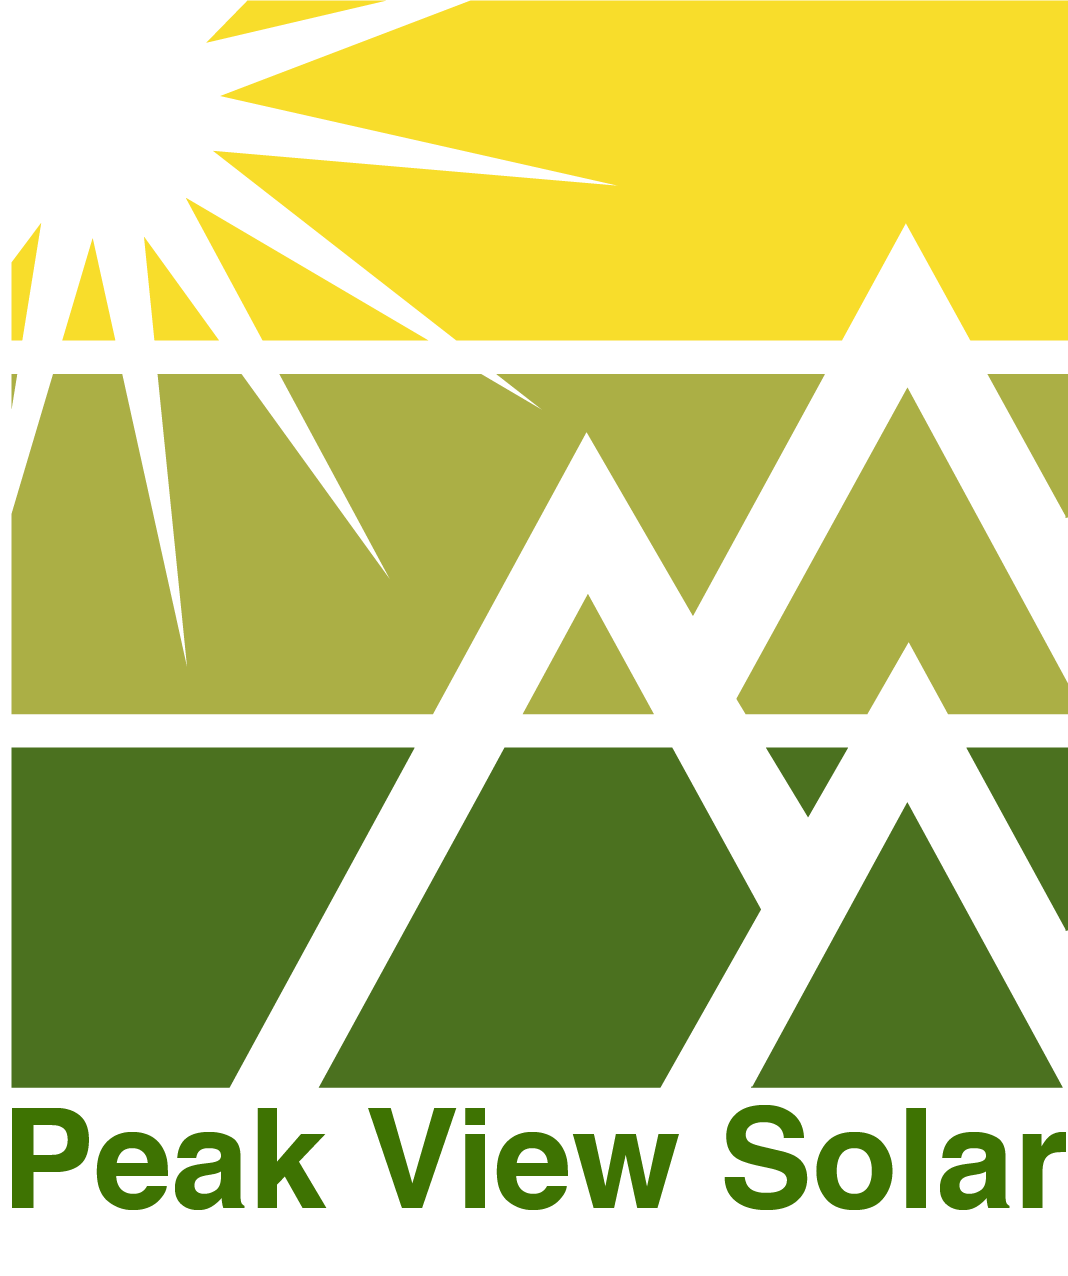 Peak View Solar - Out Of Business